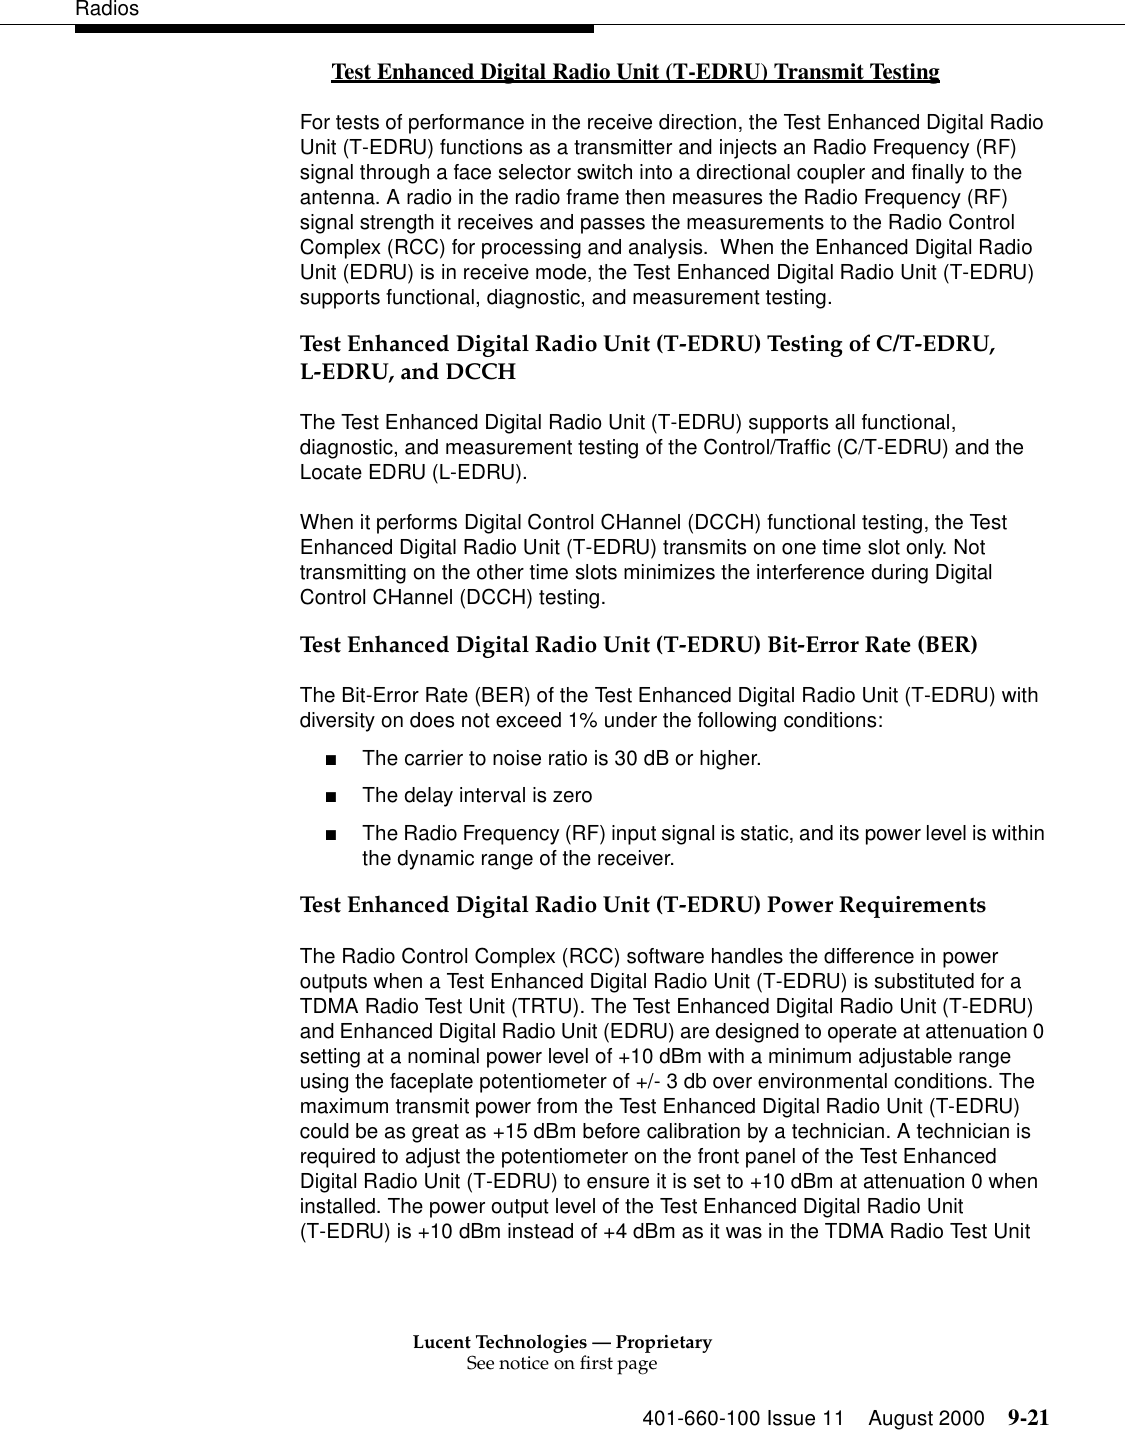 Lucent Technologies — ProprietarySee notice on first page401-660-100 Issue 11 August 2000 9-21RadiosTest Enhanced Digital Radio Unit (T-EDRU) Transmit Testing 0For tests of performance in the receive direction, the Test Enhanced Digital Radio Unit (T-EDRU) functions as a transmitter and injects an Radio Frequency (RF) signal through a face selector switch into a directional coupler and finally to the antenna. A radio in the radio frame then measures the Radio Frequency (RF) signal strength it receives and passes the measurements to the Radio Control Complex (RCC) for processing and analysis.  When the Enhanced Digital Radio Unit (EDRU) is in receive mode, the Test Enhanced Digital Radio Unit (T-EDRU) supports functional, diagnostic, and measurement testing. Test Enhanced Digital Radio Unit (T-EDRU) Testing of C/T-EDRU, L-EDRU, and DCCH The Test Enhanced Digital Radio Unit (T-EDRU) supports all functional, diagnostic, and measurement testing of the Control/Traffic (C/T-EDRU) and the Locate EDRU (L-EDRU). When it performs Digital Control CHannel (DCCH) functional testing, the Test Enhanced Digital Radio Unit (T-EDRU) transmits on one time slot only. Not transmitting on the other time slots minimizes the interference during Digital Control CHannel (DCCH) testing. Test Enhanced Digital Radio Unit (T-EDRU) Bit-Error Rate (BER)The Bit-Error Rate (BER) of the Test Enhanced Digital Radio Unit (T-EDRU) with diversity on does not exceed 1% under the following conditions: ■The carrier to noise ratio is 30 dB or higher. ■The delay interval is zero ■The Radio Frequency (RF) input signal is static, and its power level is within the dynamic range of the receiver. Test Enhanced Digital Radio Unit (T-EDRU) Power RequirementsThe Radio Control Complex (RCC) software handles the difference in power outputs when a Test Enhanced Digital Radio Unit (T-EDRU) is substituted for a TDMA Radio Test Unit (TRTU). The Test Enhanced Digital Radio Unit (T-EDRU) and Enhanced Digital Radio Unit (EDRU) are designed to operate at attenuation 0 setting at a nominal power level of +10 dBm with a minimum adjustable range using the faceplate potentiometer of +/- 3 db over environmental conditions. The maximum transmit power from the Test Enhanced Digital Radio Unit (T-EDRU) could be as great as +15 dBm before calibration by a technician. A technician is required to adjust the potentiometer on the front panel of the Test Enhanced Digital Radio Unit (T-EDRU) to ensure it is set to +10 dBm at attenuation 0 when installed. The power output level of the Test Enhanced Digital Radio Unit (T-EDRU) is +10 dBm instead of +4 dBm as it was in the TDMA Radio Test Unit 